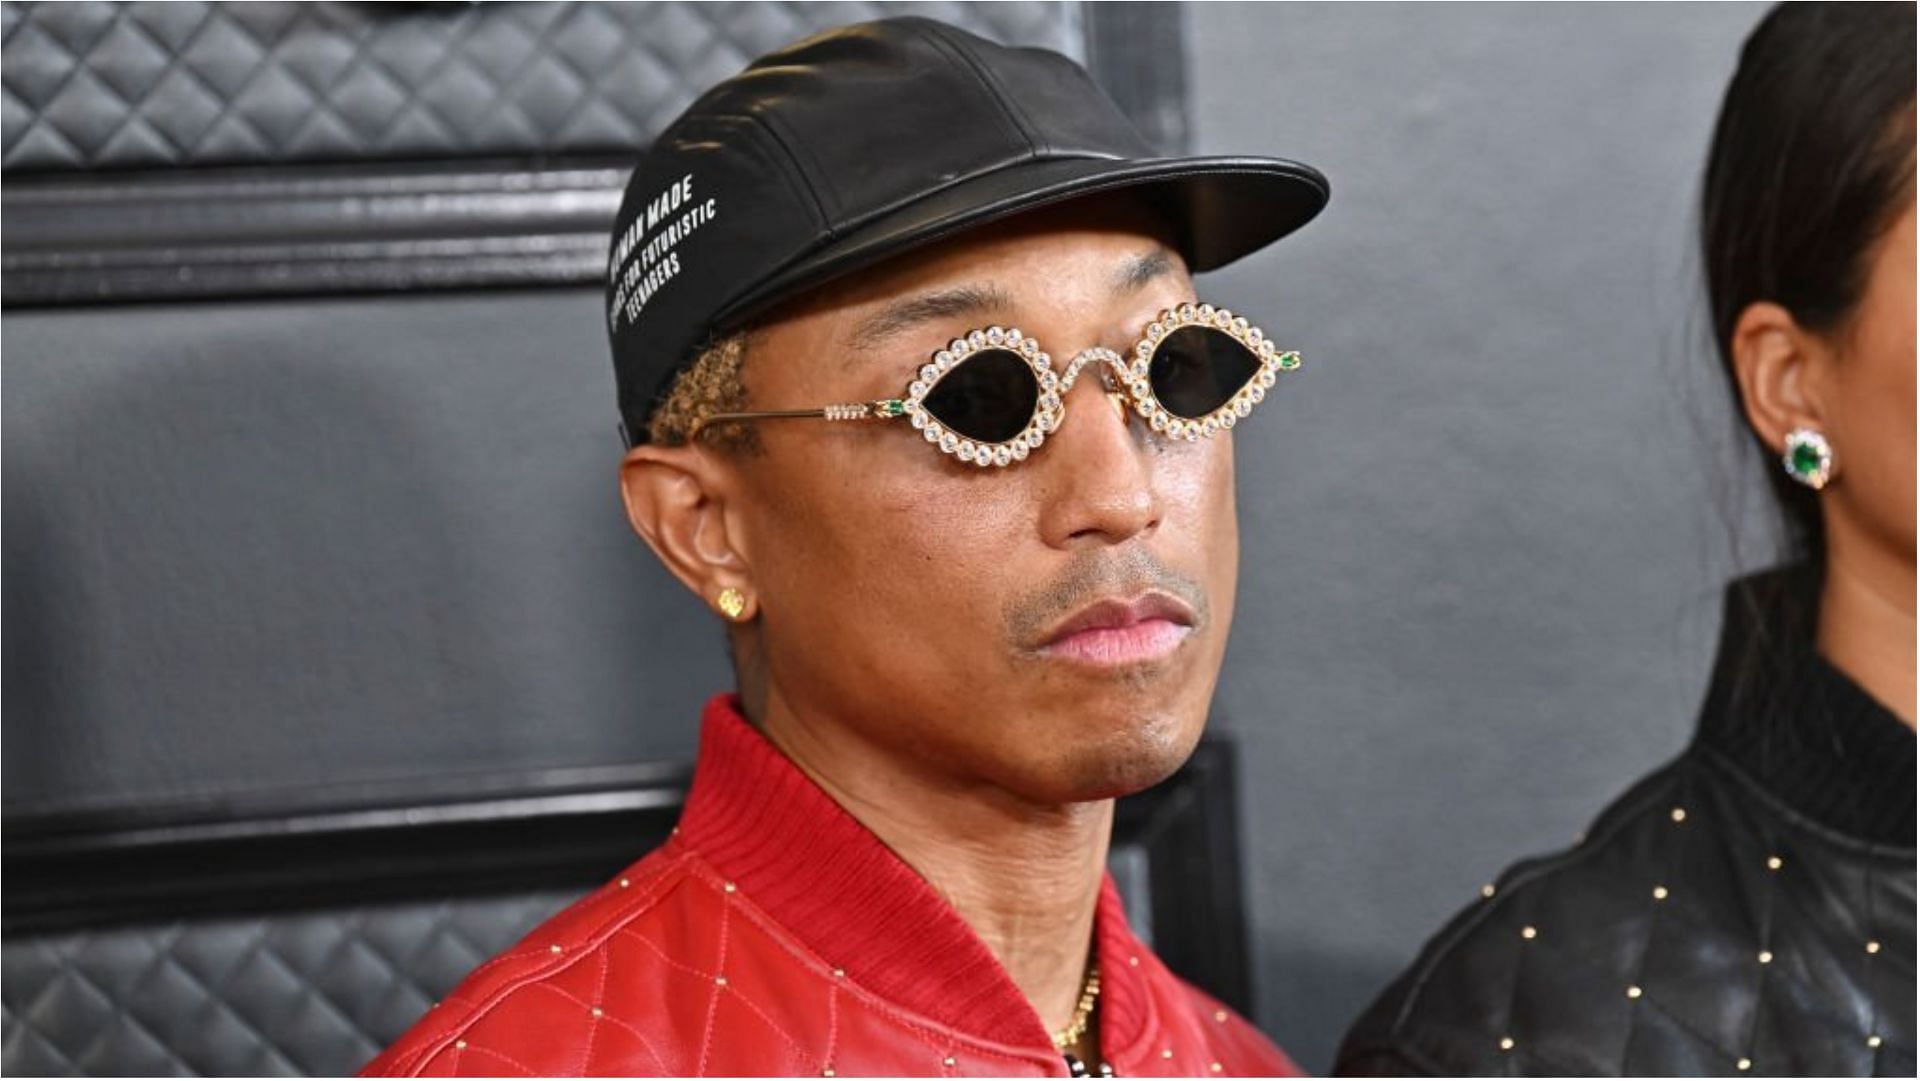 Pharrell Williams recently became the creative director of Louis Vuitton (Image via Michael Buckner/Getty Images)